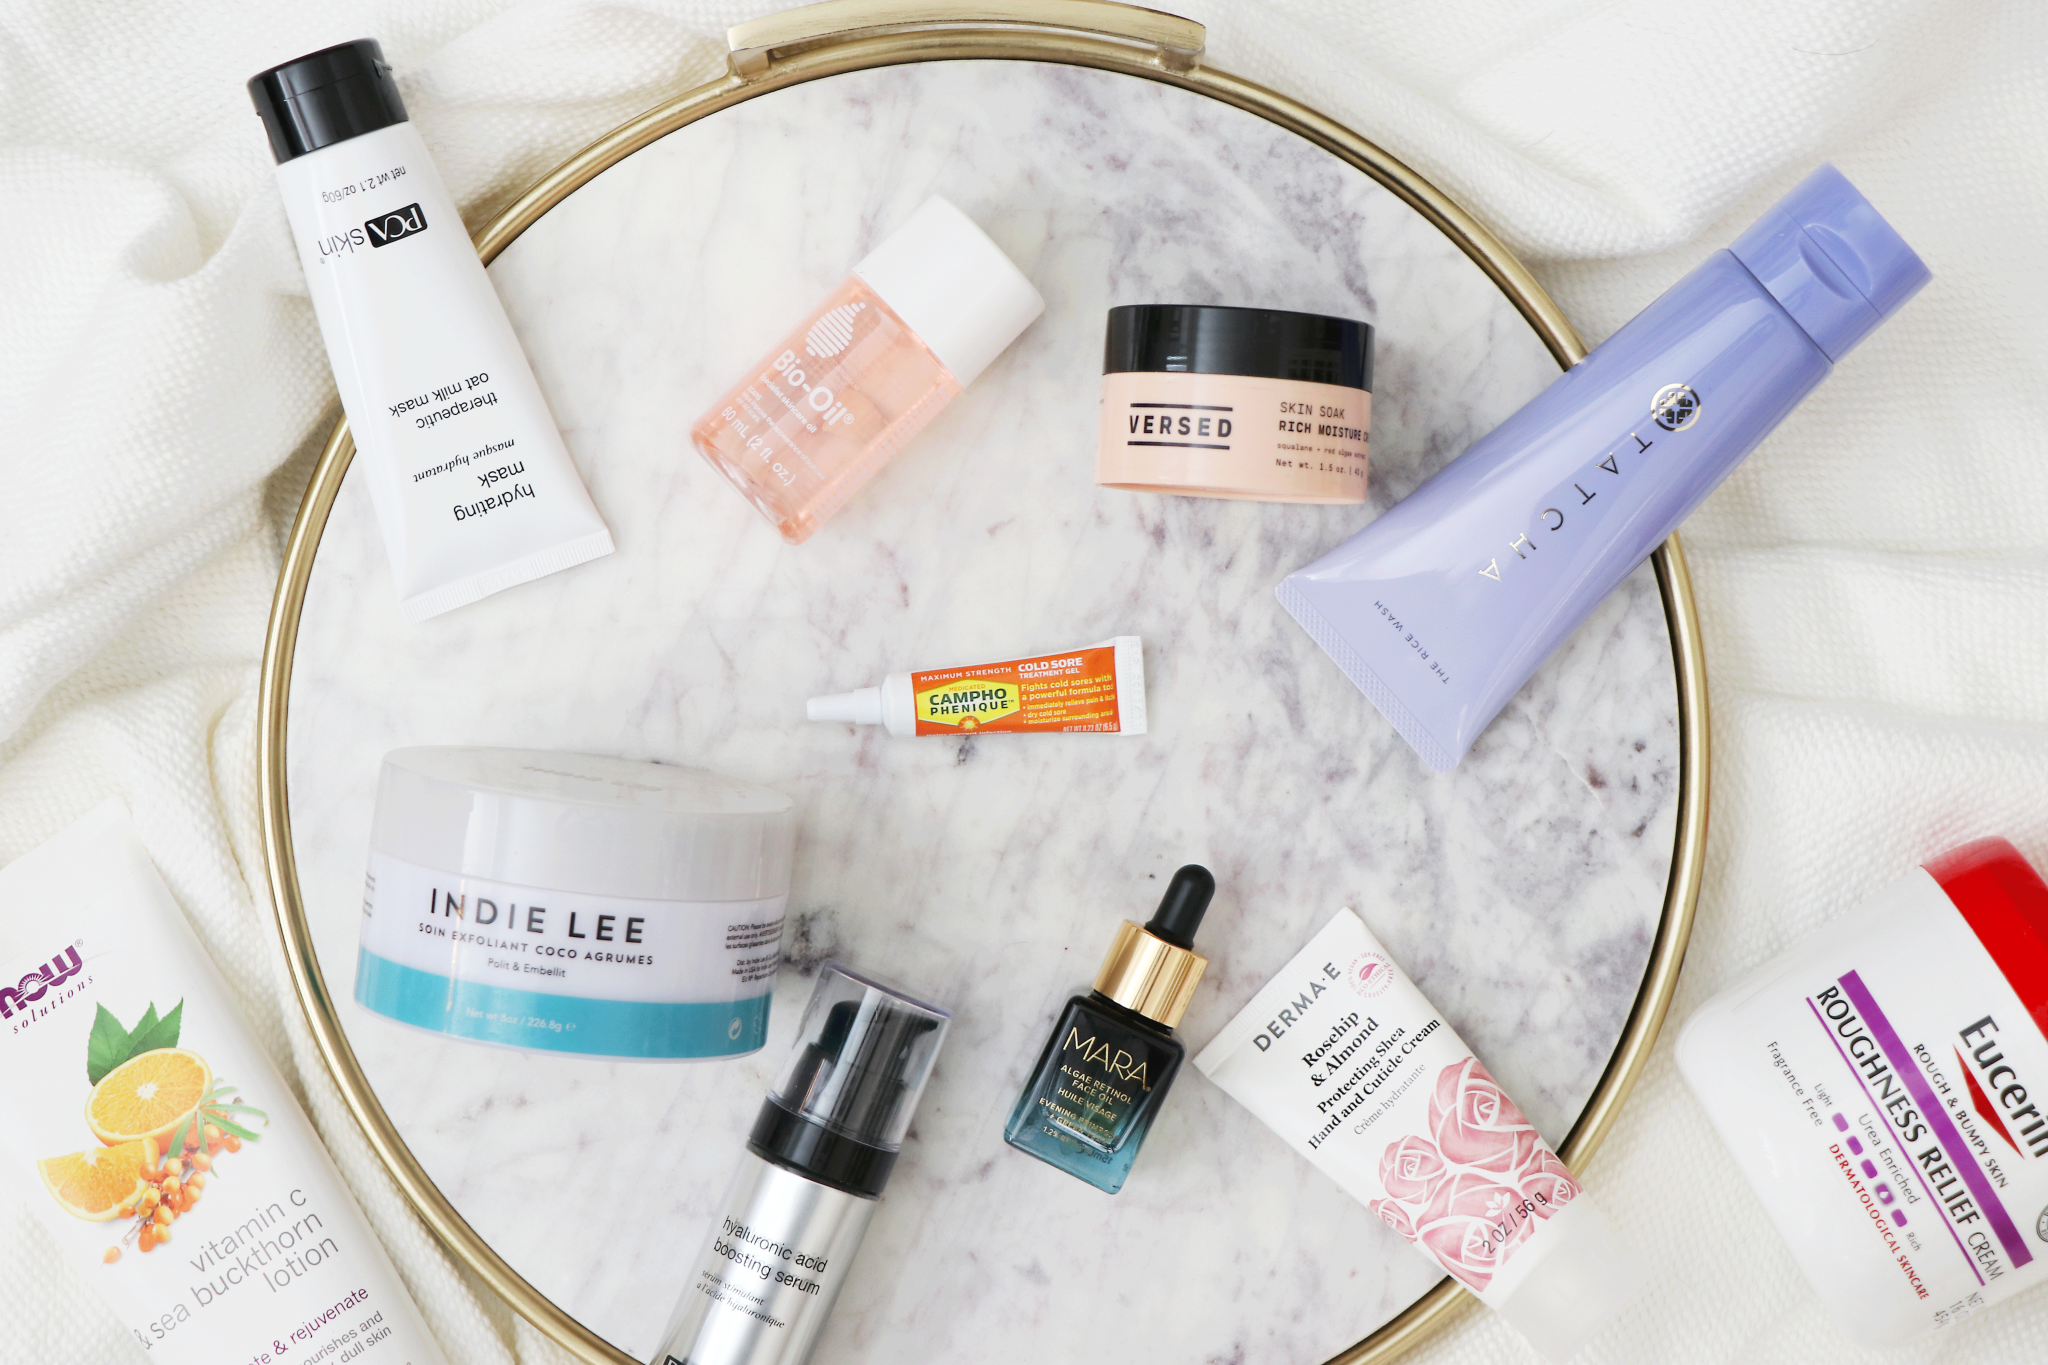 Looking to be prepared for cold weather this year? Los Angeles Blogger Jamie Lewis is sharing her top tips to stay hydrated and cold sore free with her cold weather beauty must haves here!